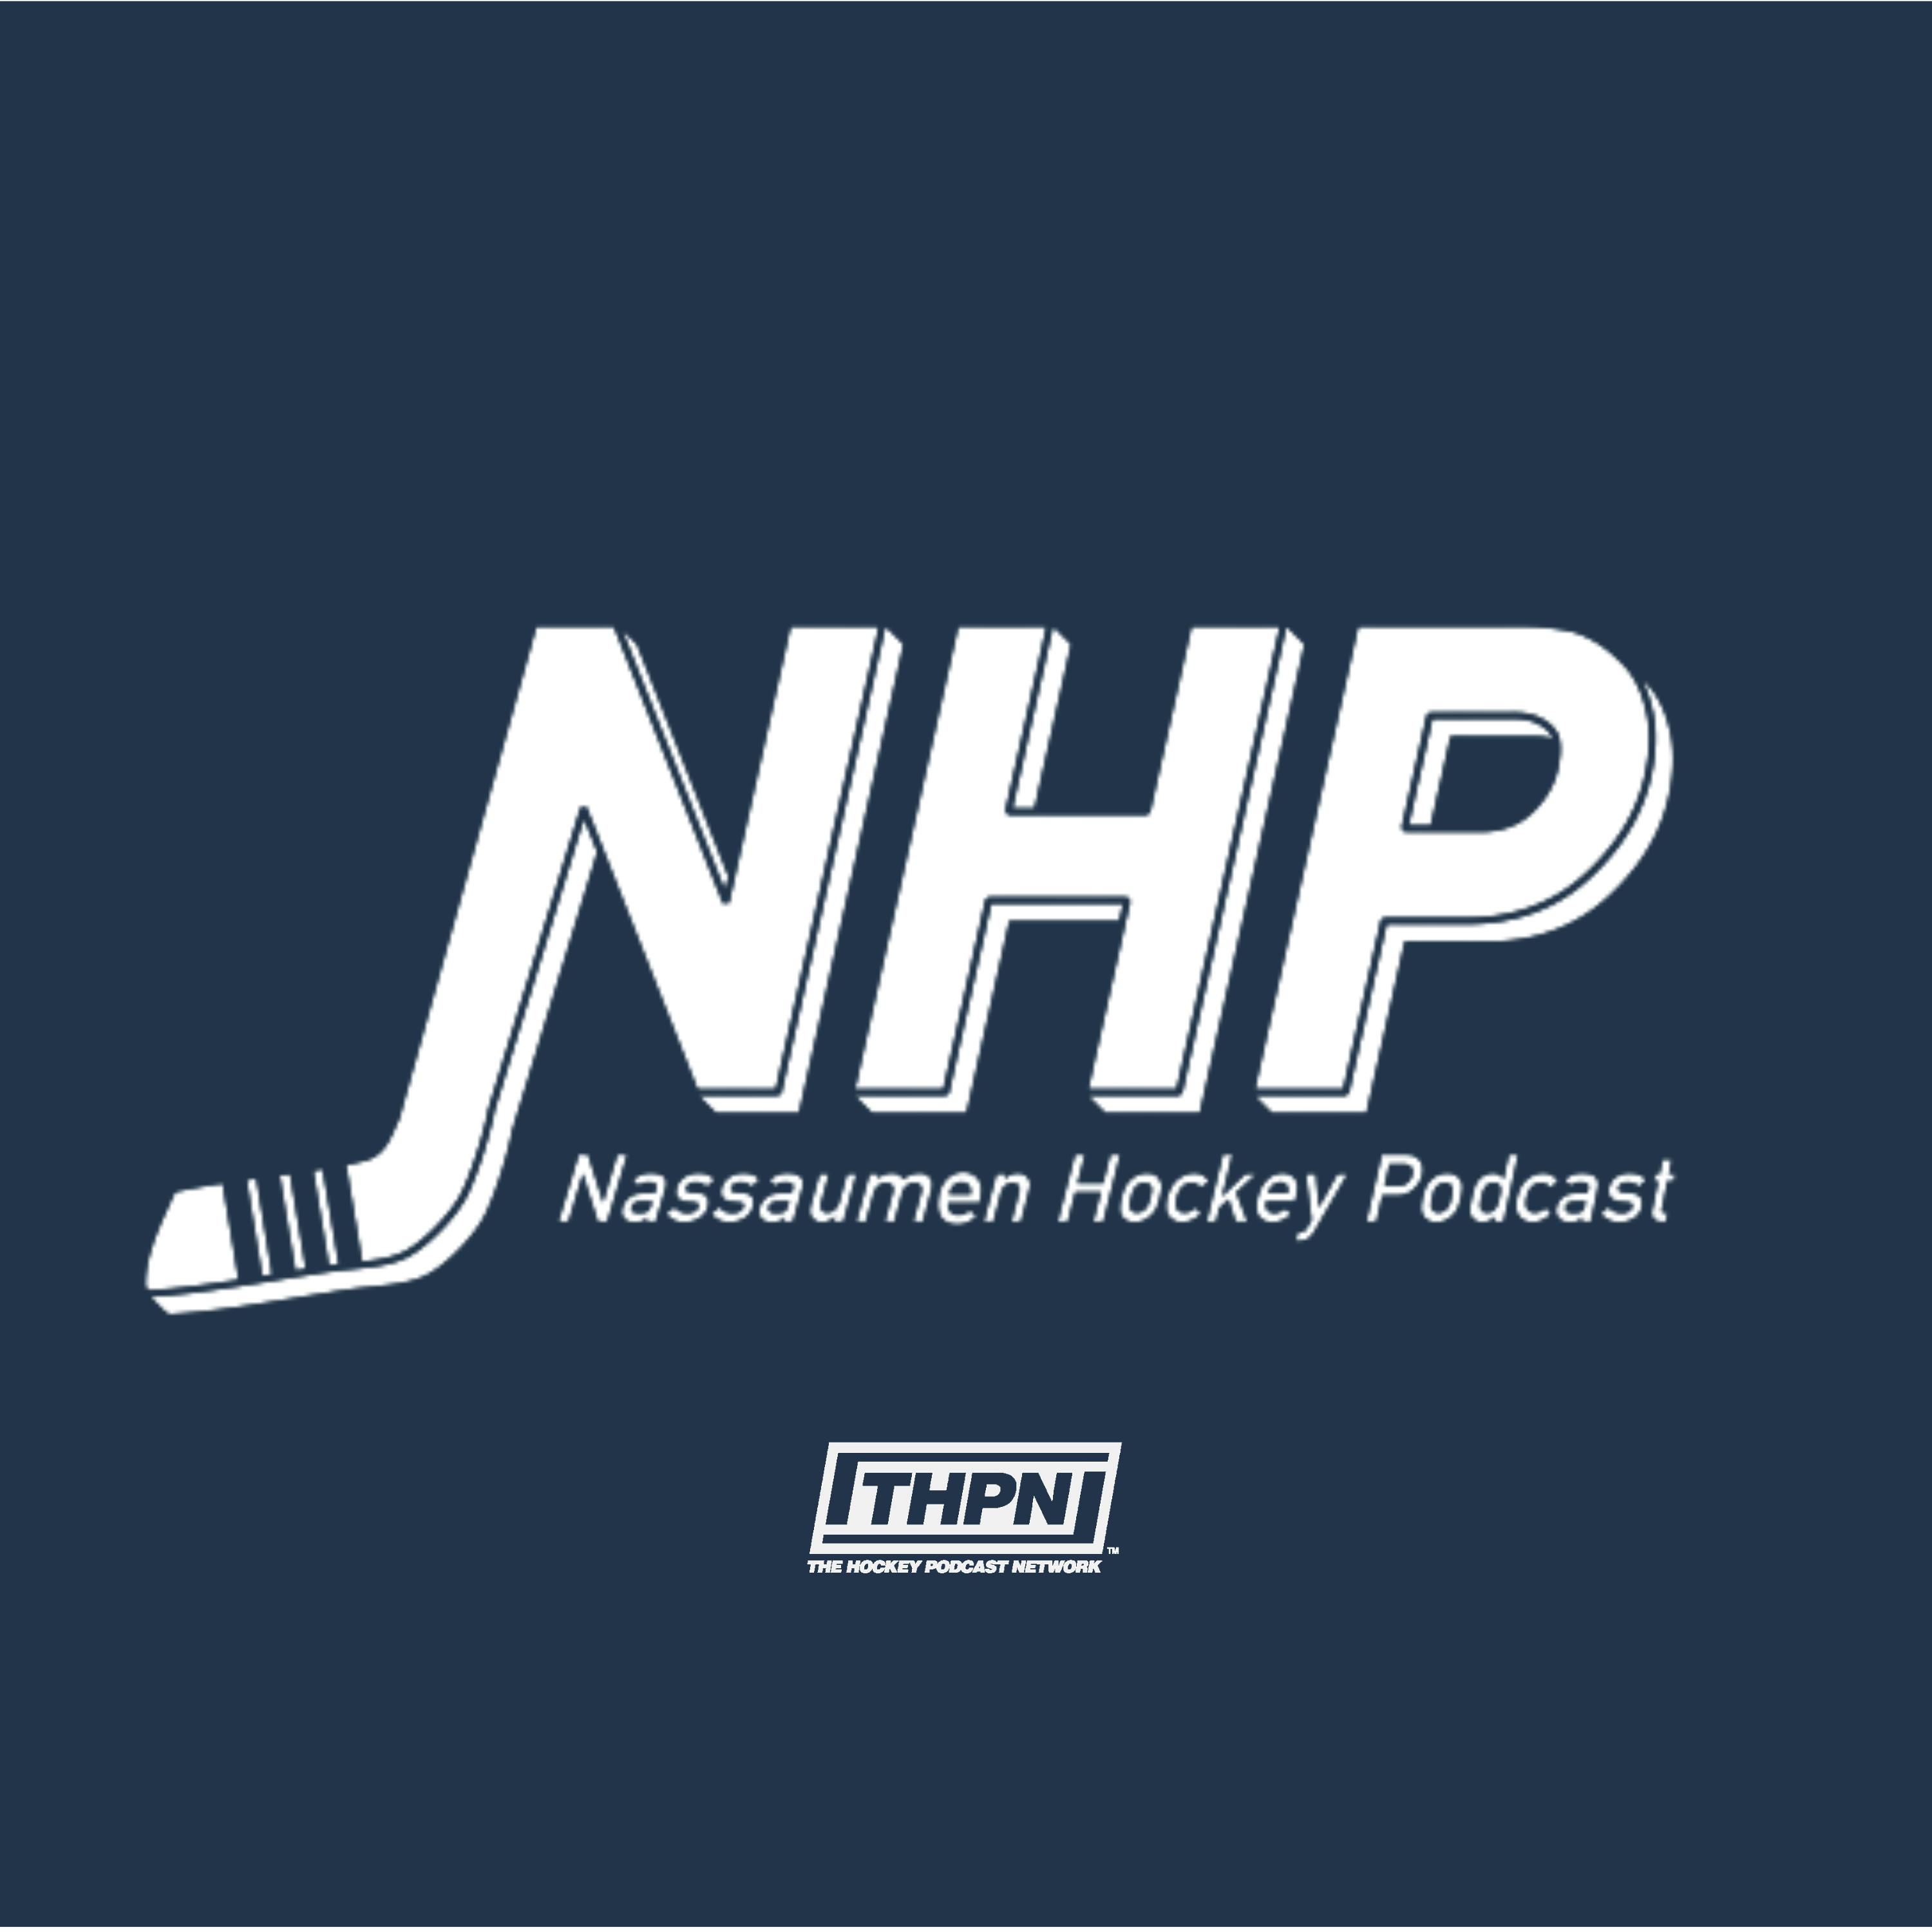 Episode 168: Missing Identity - Who are the New York Islanders?